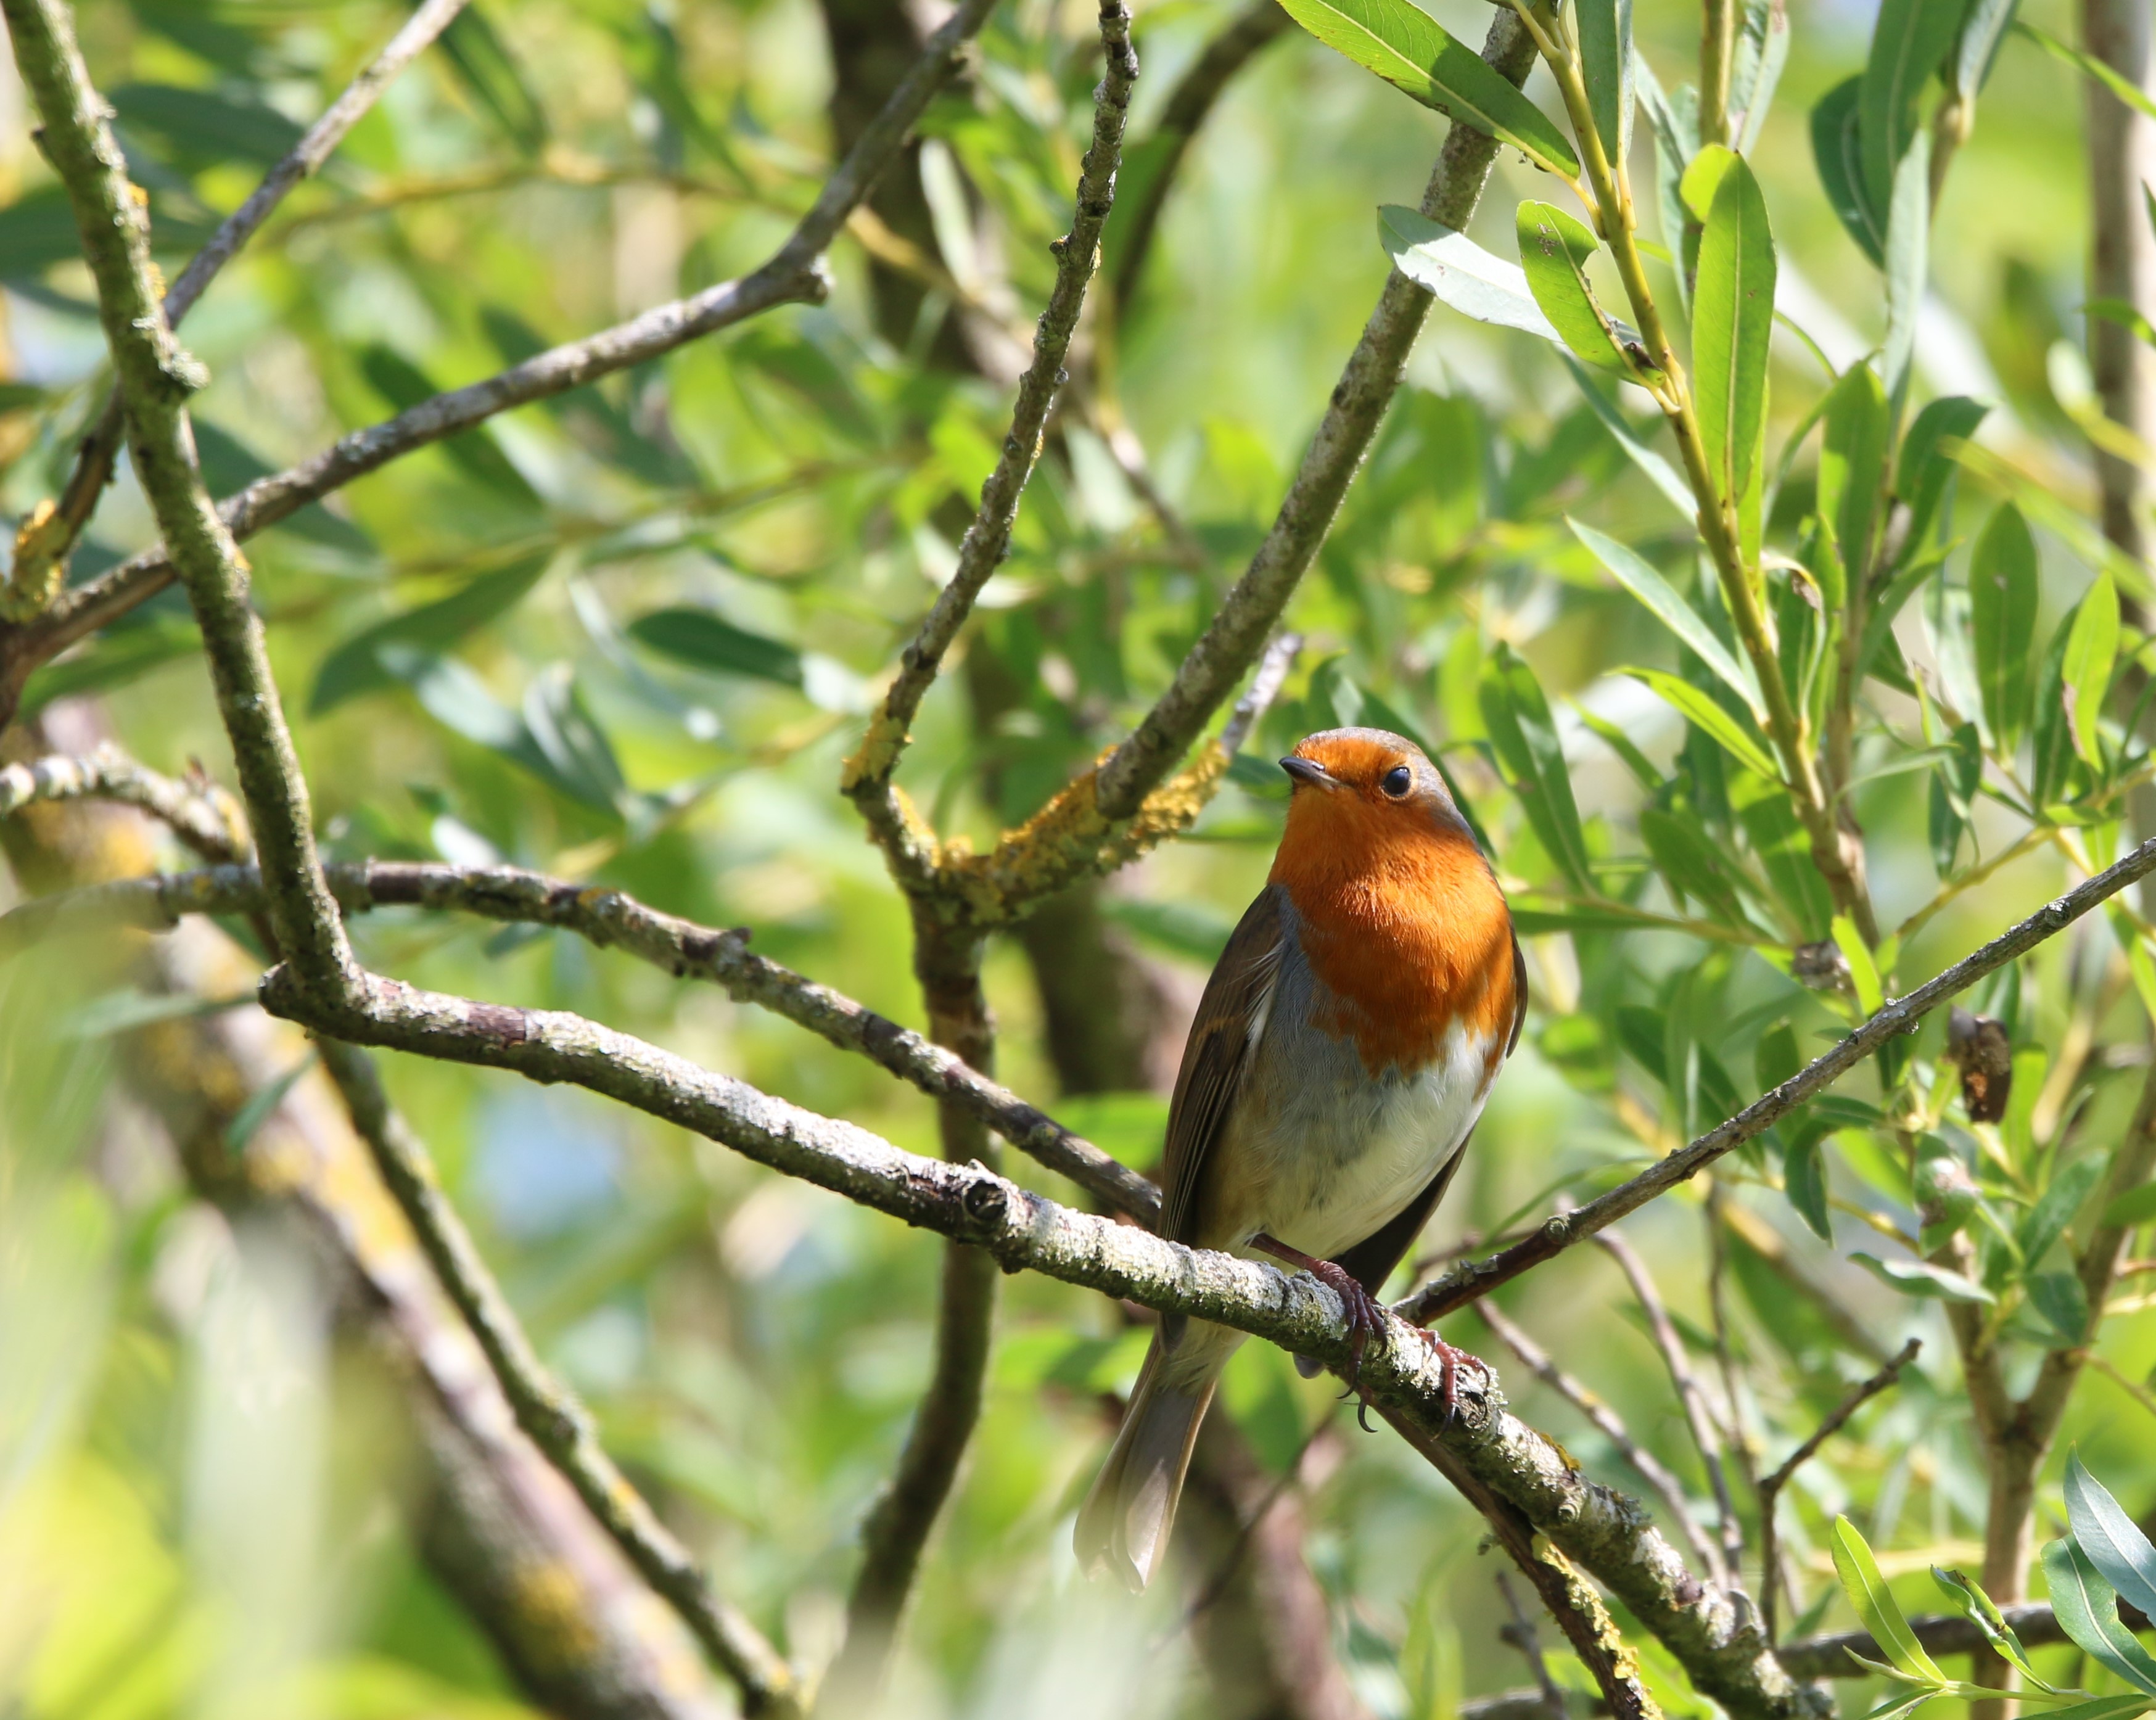 Robin at Surlingham Church Marshes by Lorraine Taylor